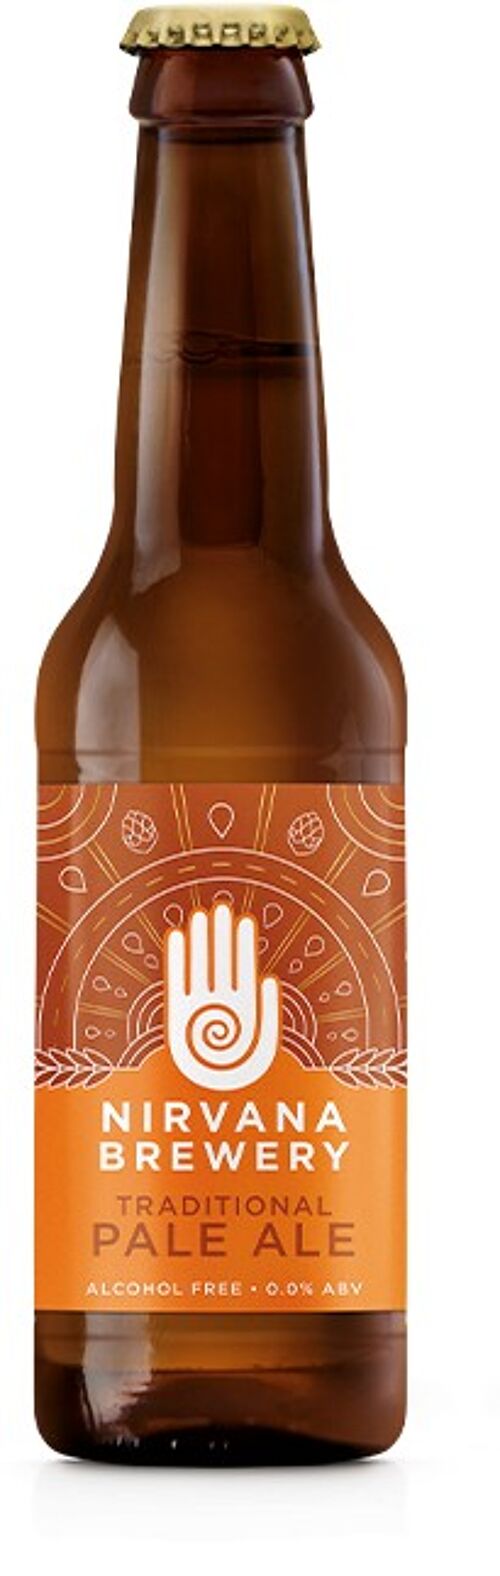 TRADITIONAL PALE ALE-0.0% ABV - 12 x 330ml Bottle